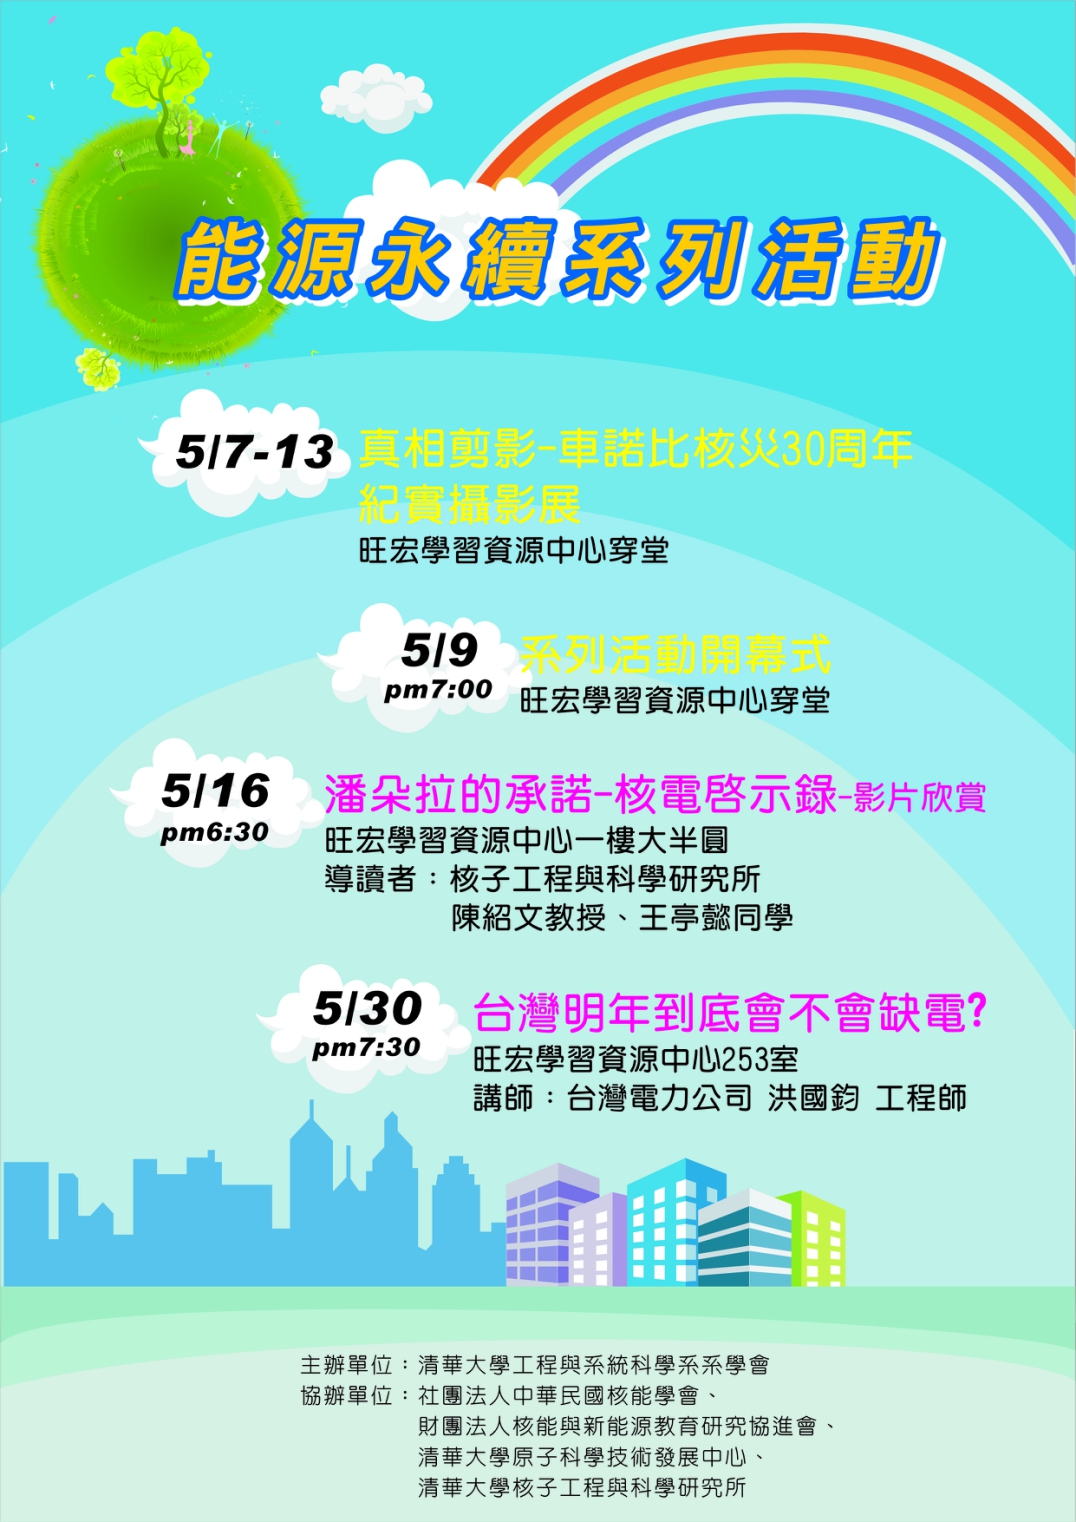 poster of sustained Energy 2016 events